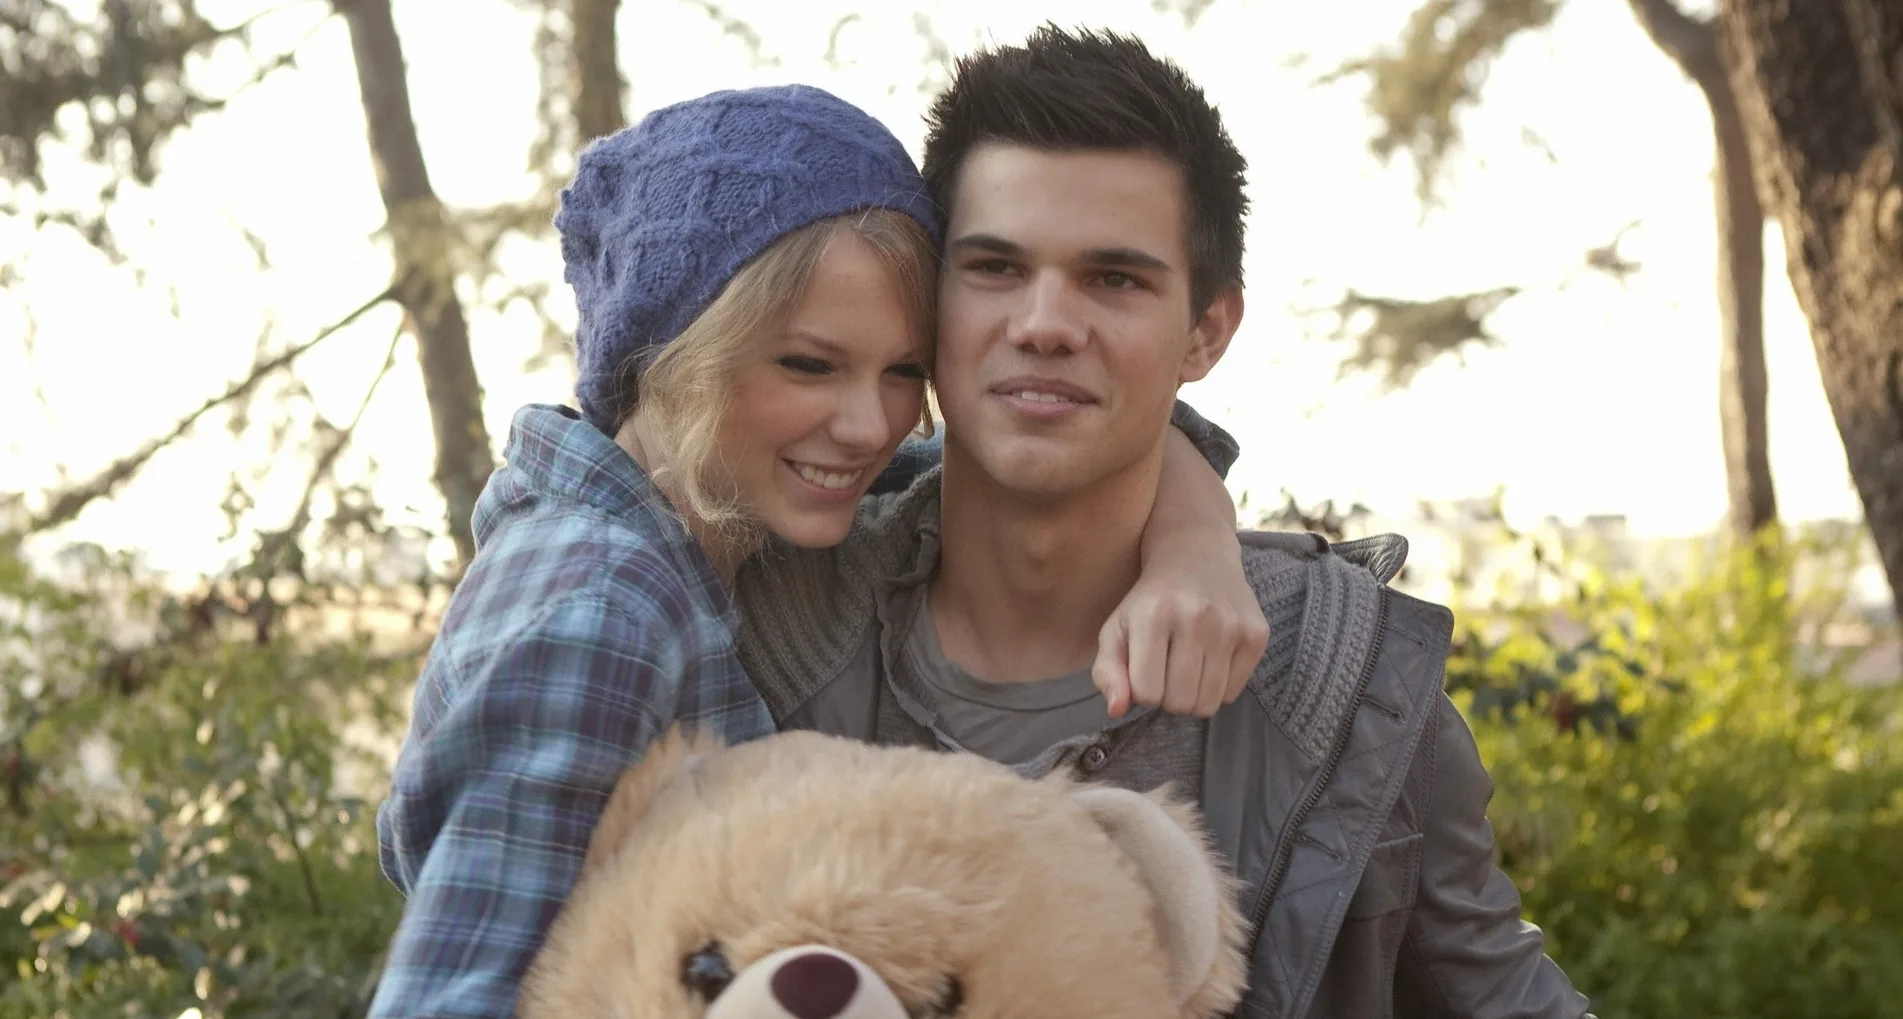 Taylor Lautner regrets not standing up for Taylor Swift when Ye yanked her mic